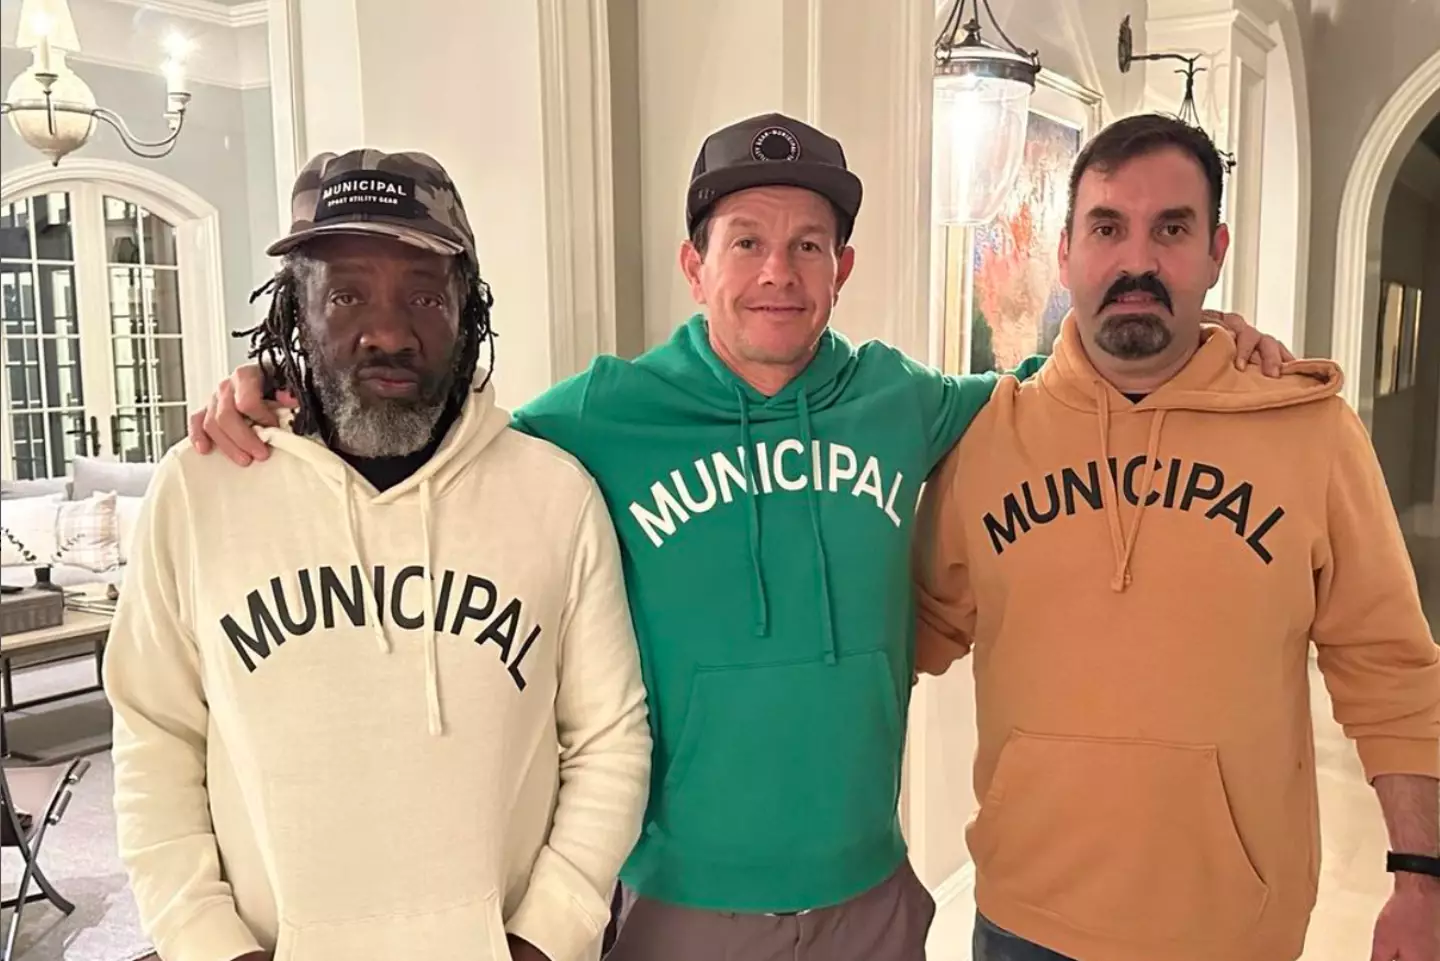 The actor has his own apparel line, Muncipal.